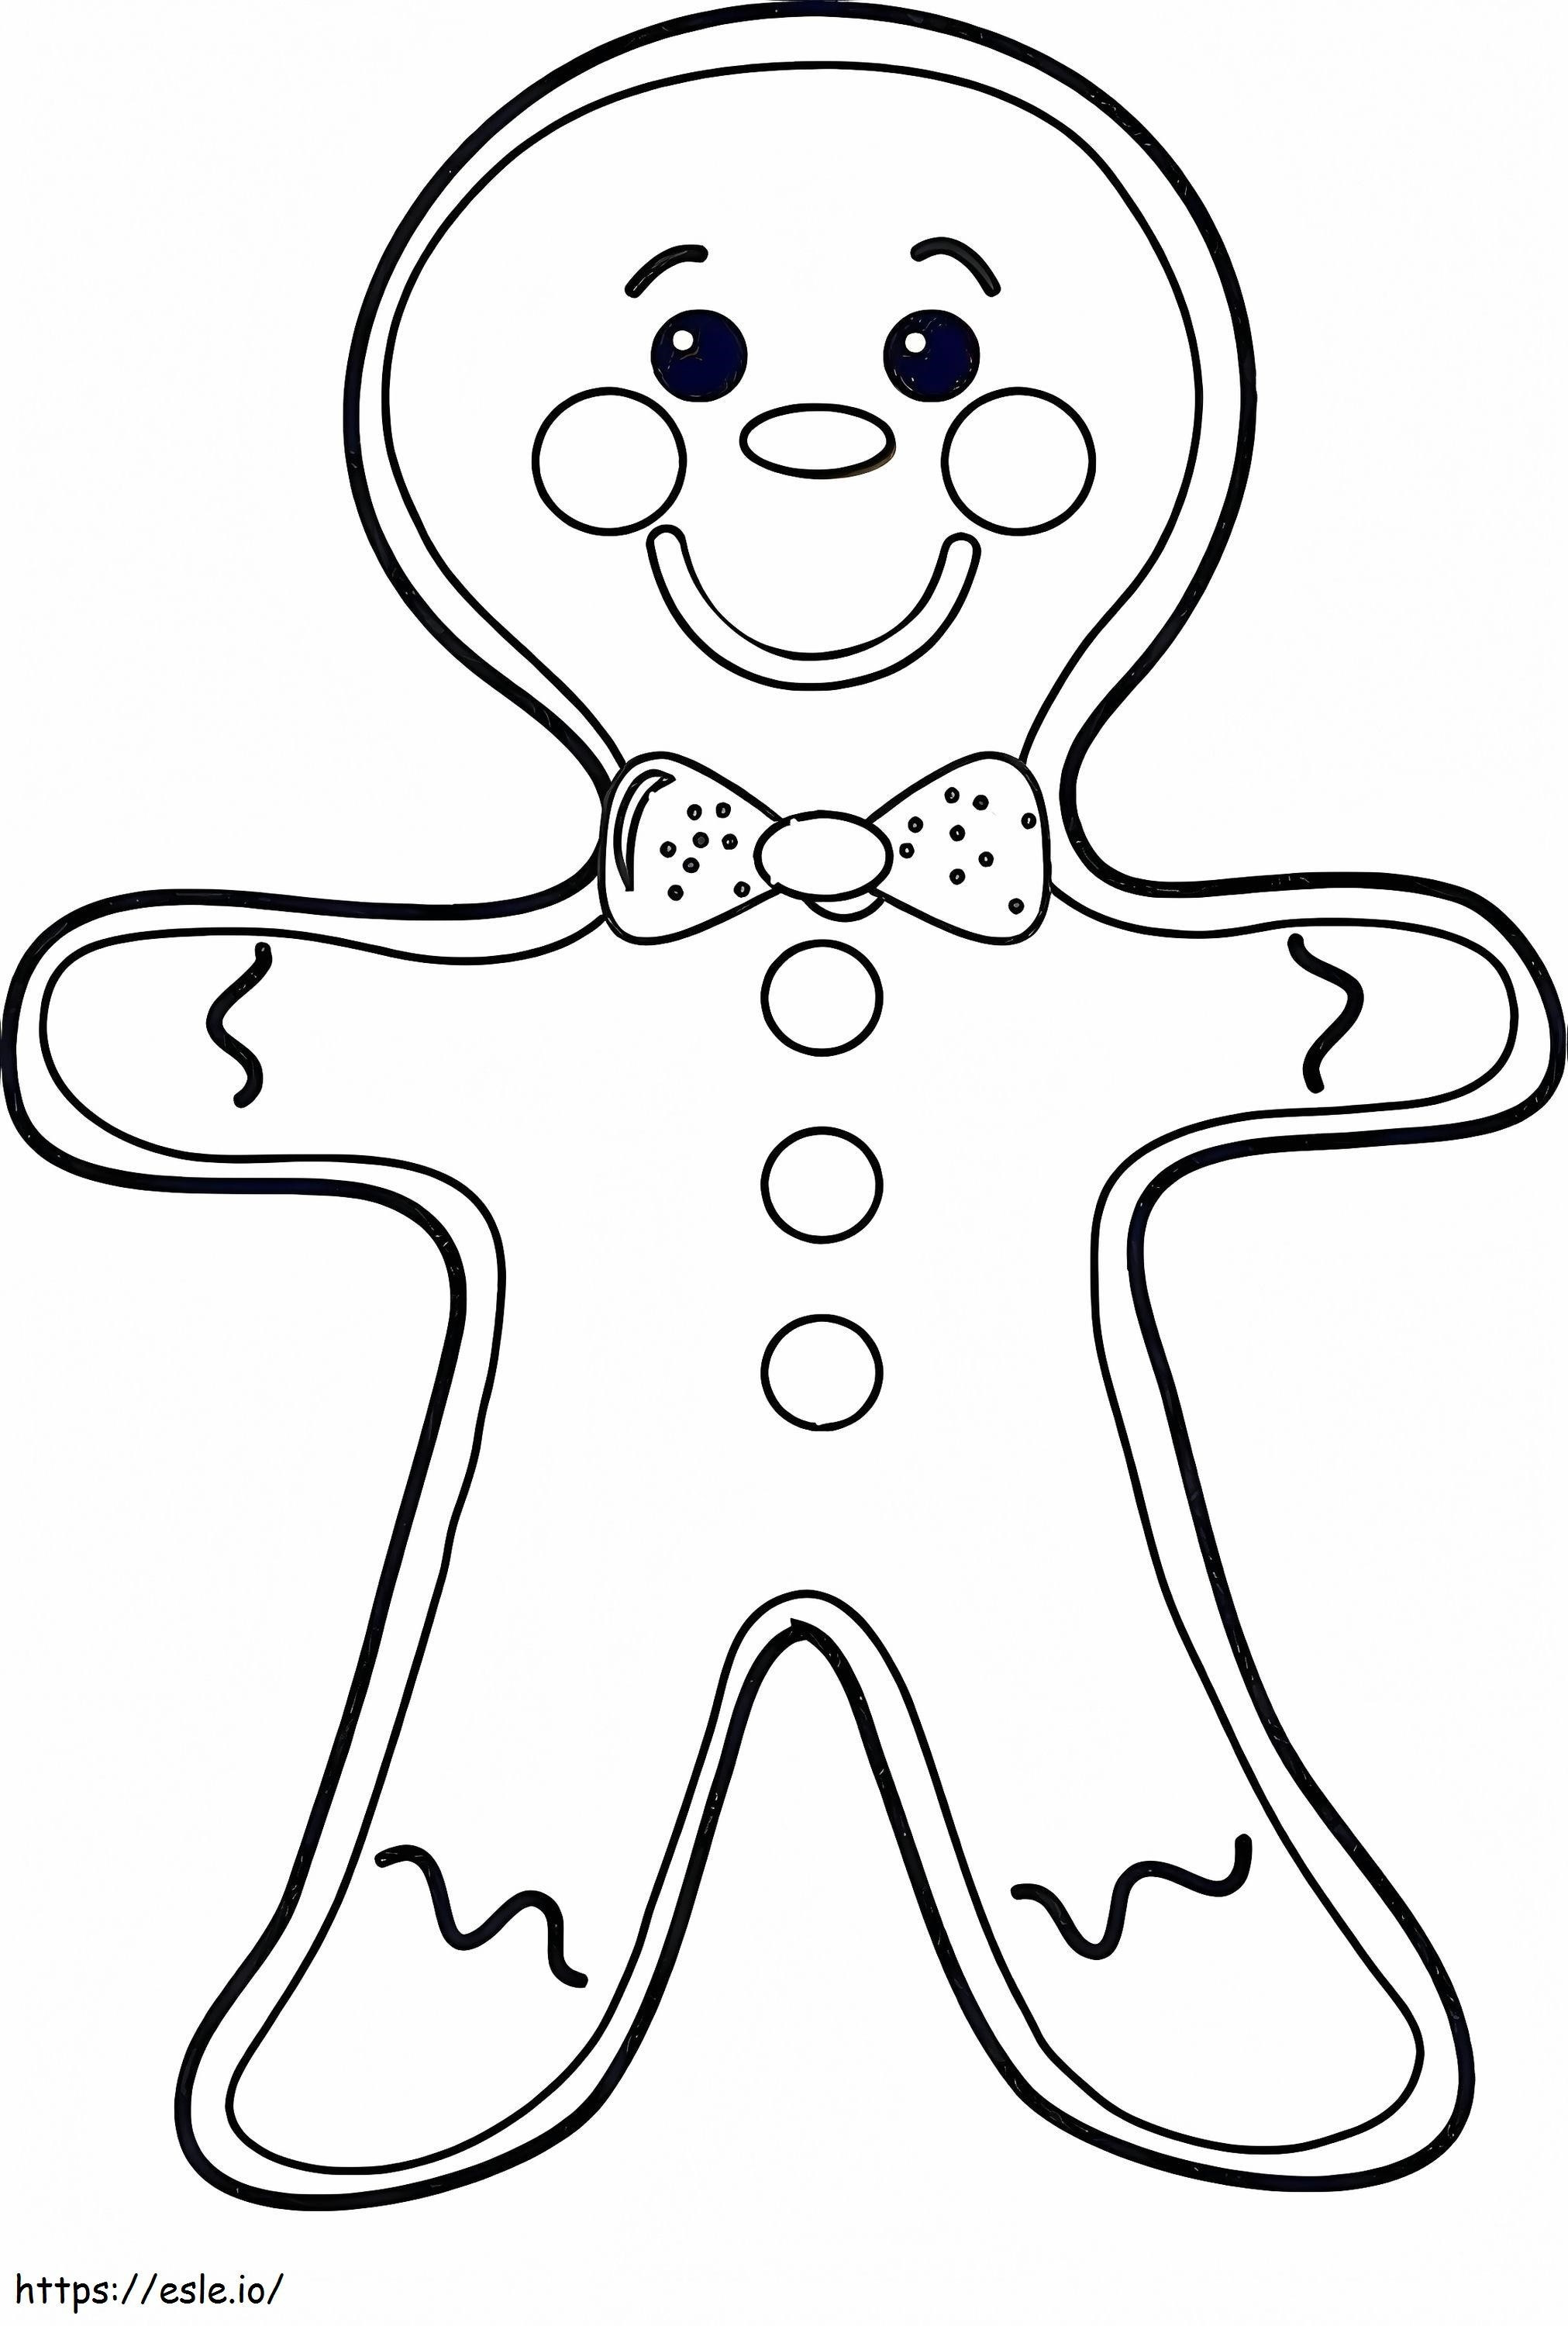 Funny Gingerbread Man coloring page